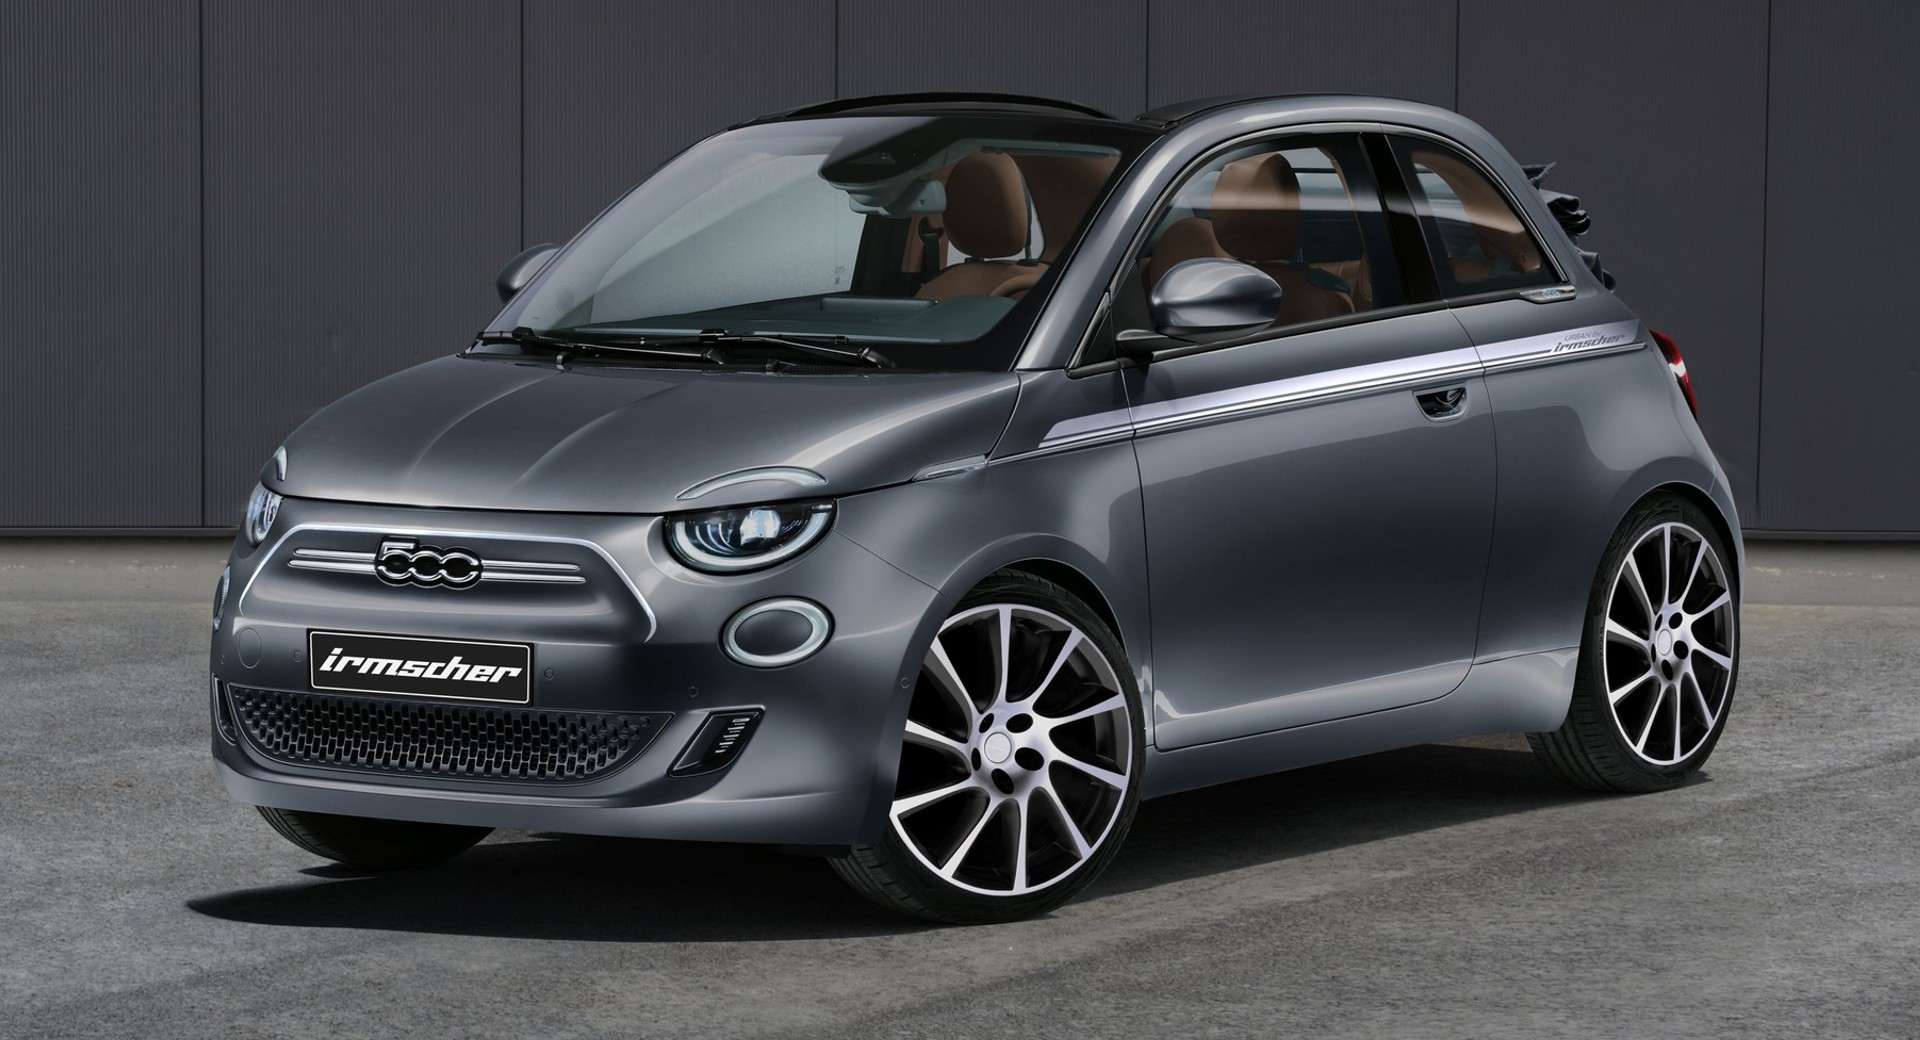 Irmscher's Fiat 500 Gets 17-Inch Alloy Wheels And Leather